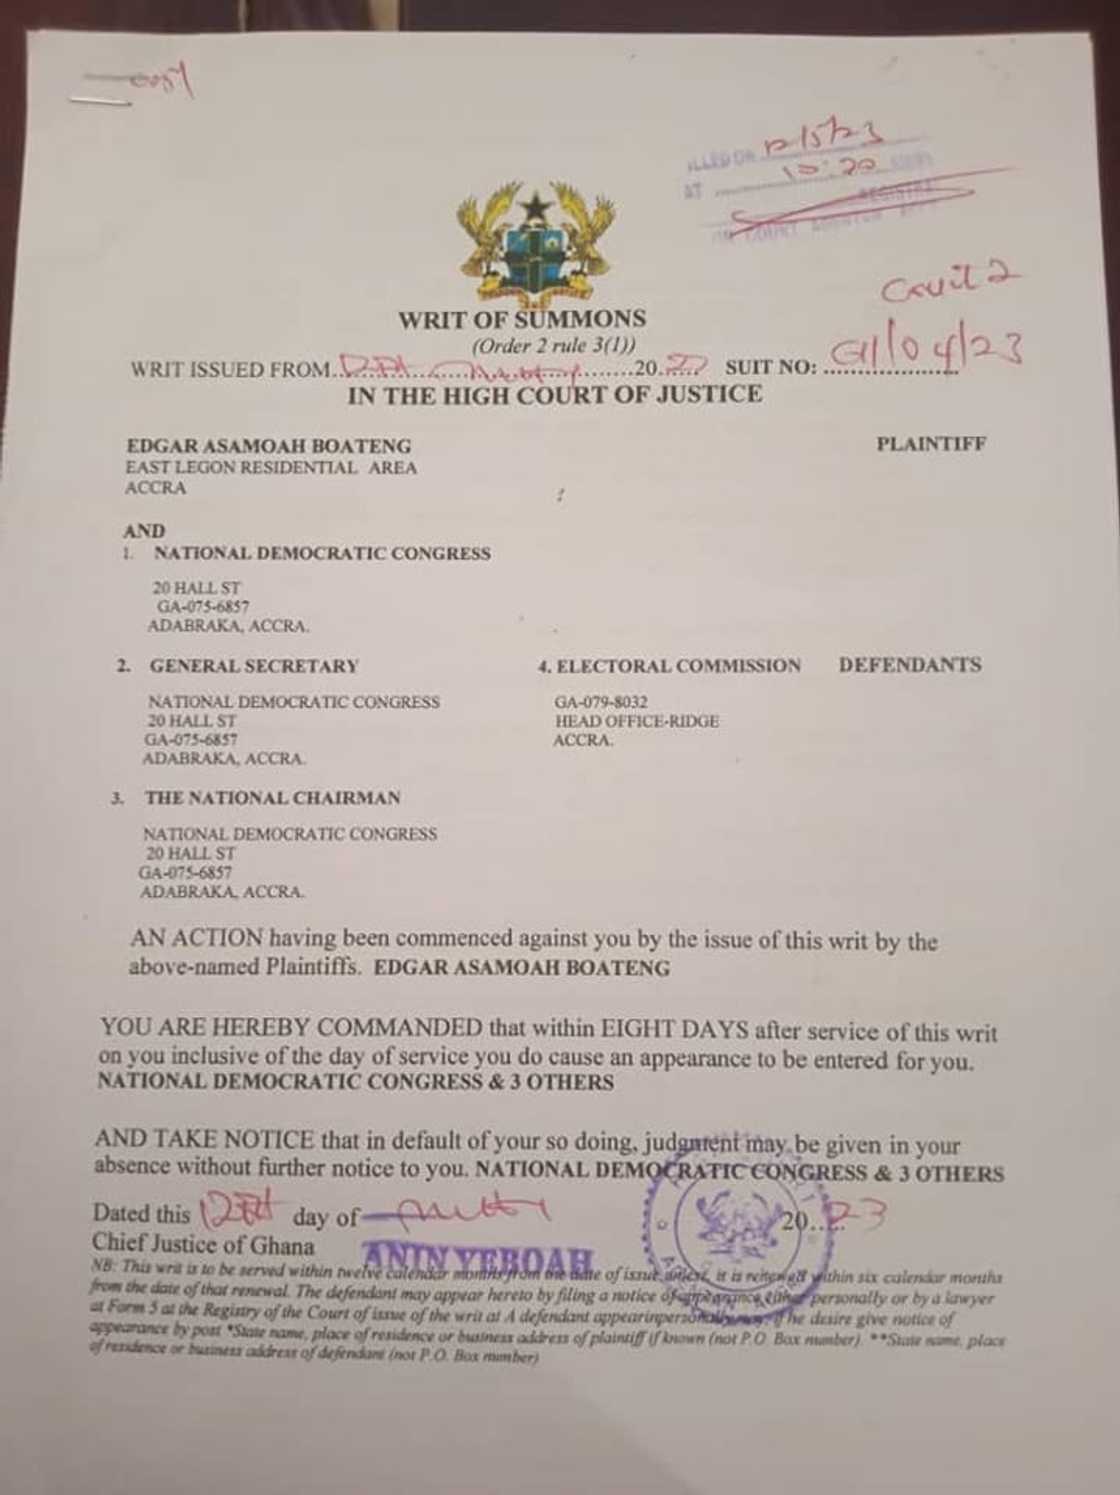 The suit filed by Edgar Asamoah Boateng to injunct the NDC primaries.